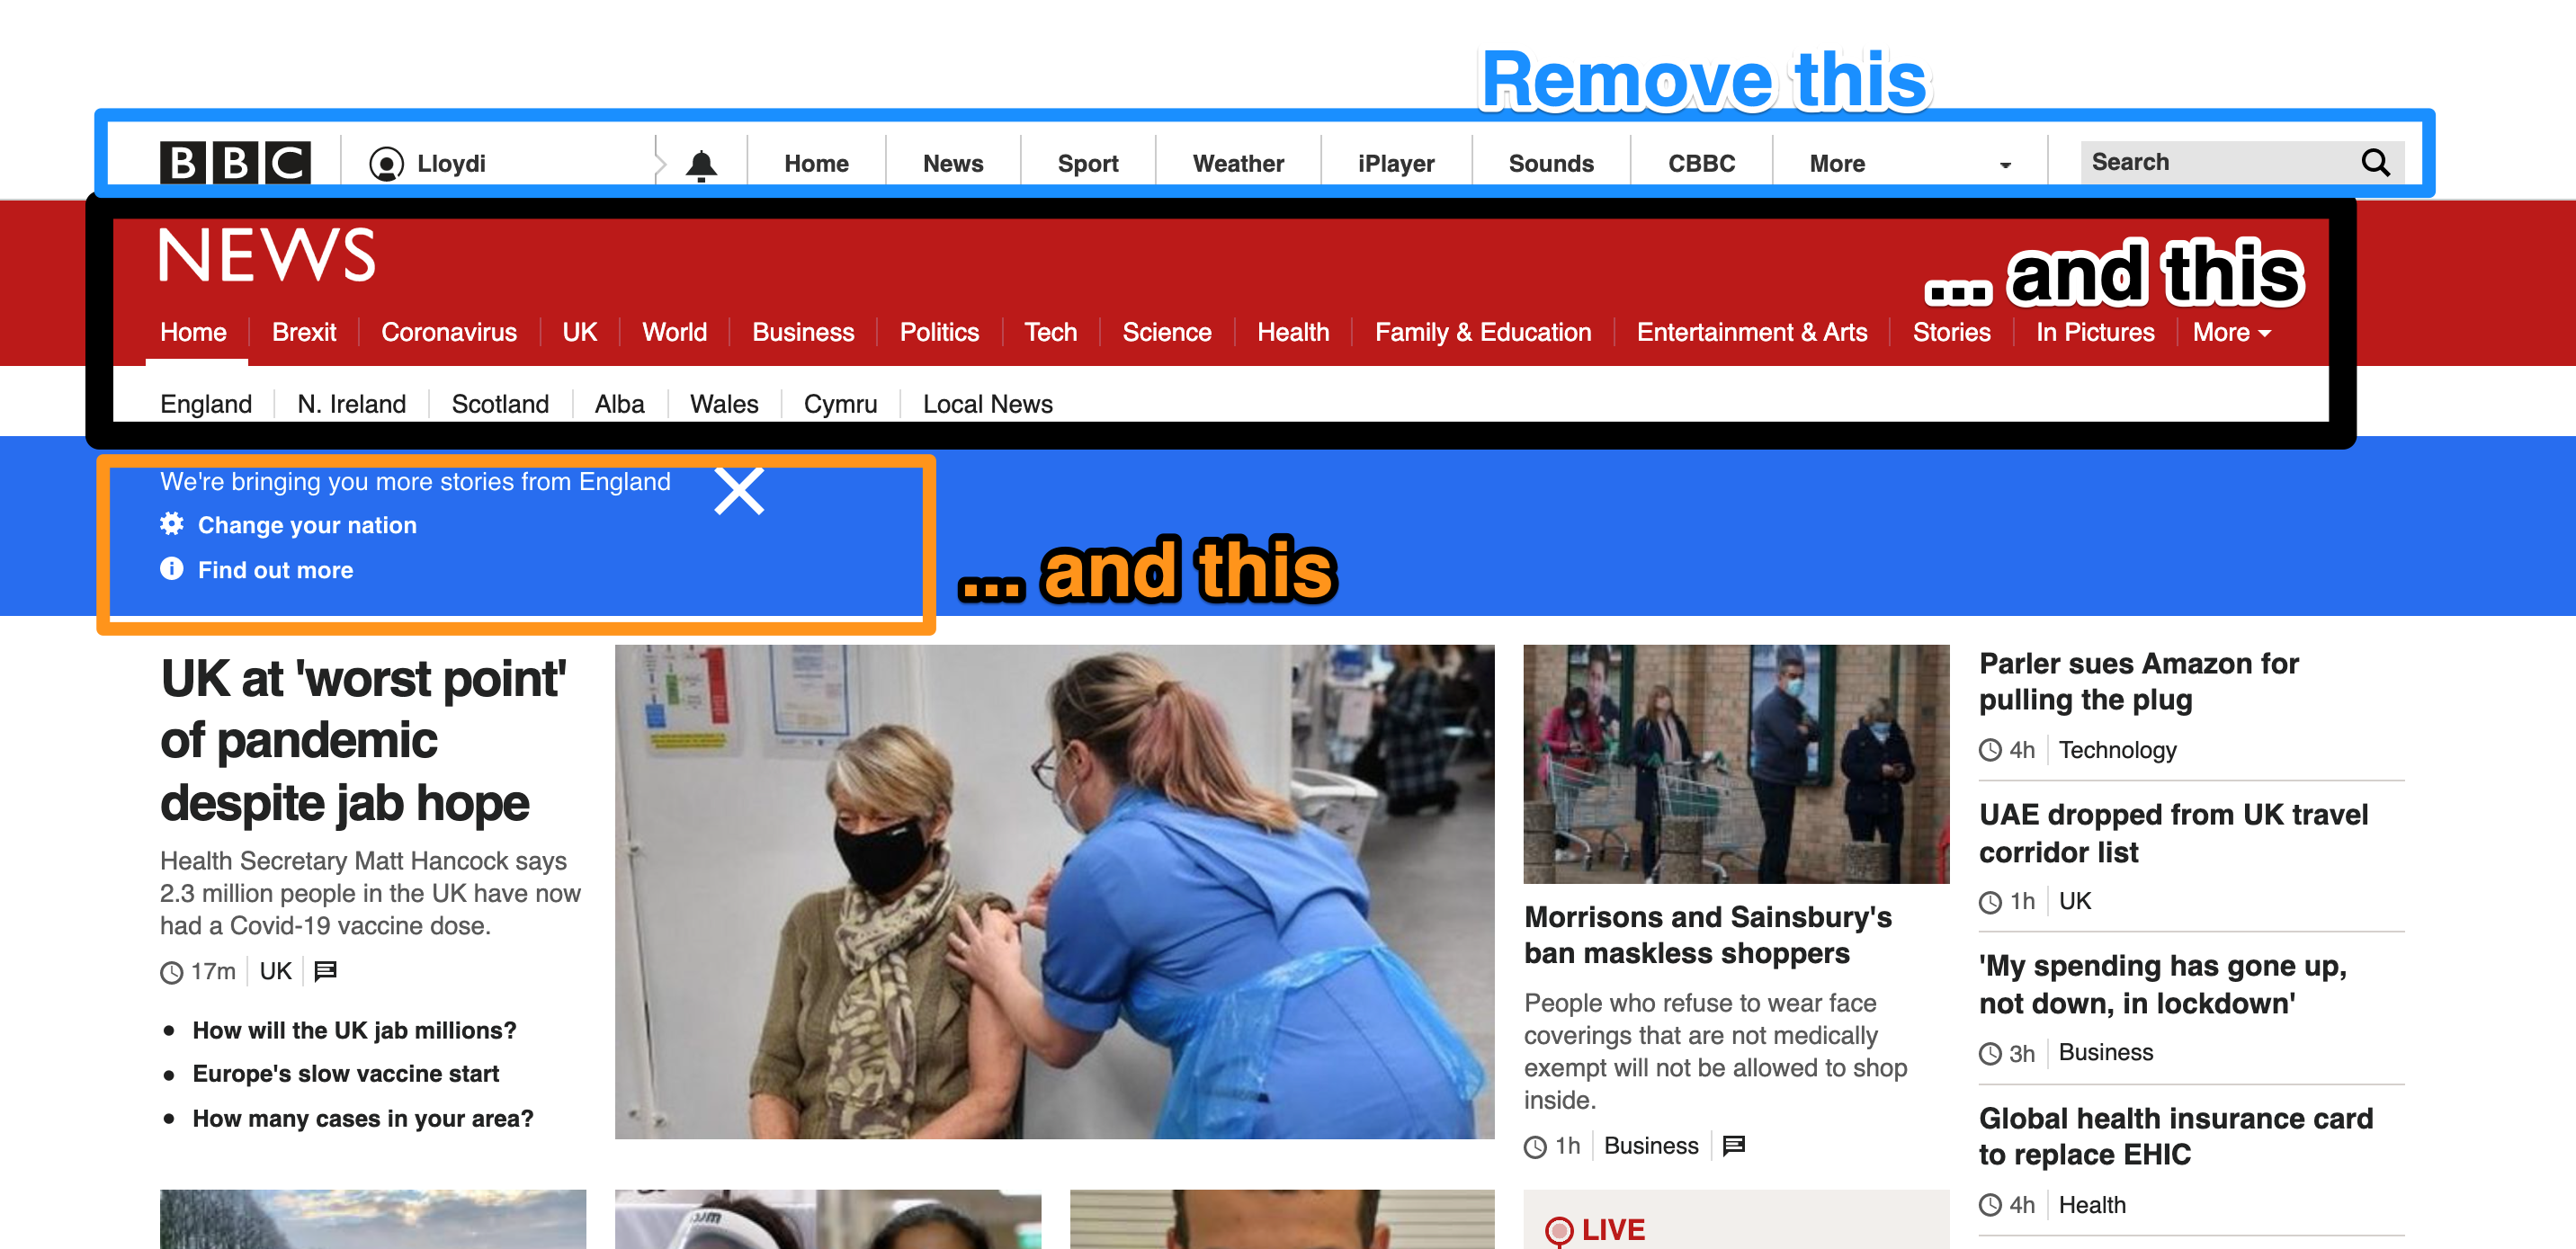 Screenshot of BBC News website with common header sections indicated for removal